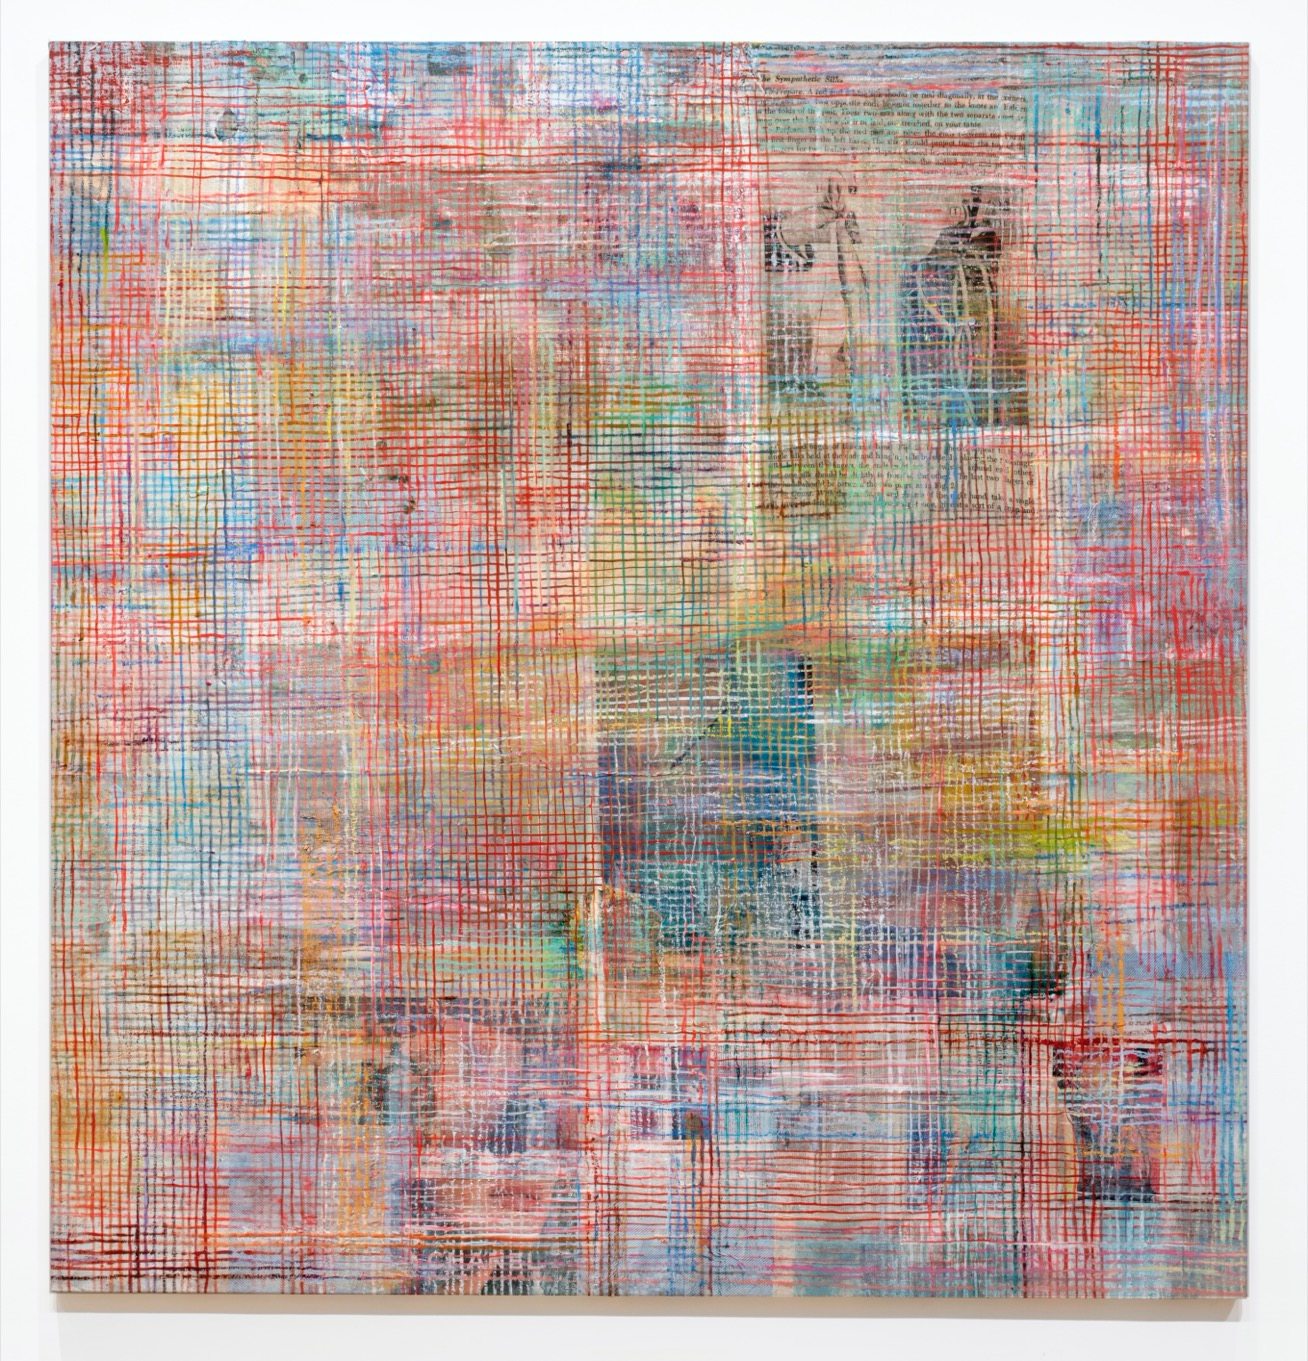 Mandy El-Sayegh
Net-Grid (silk figure), 2021
Oil and mixed media on linen with
silkscreened collaged elements
235 x 225 cm.